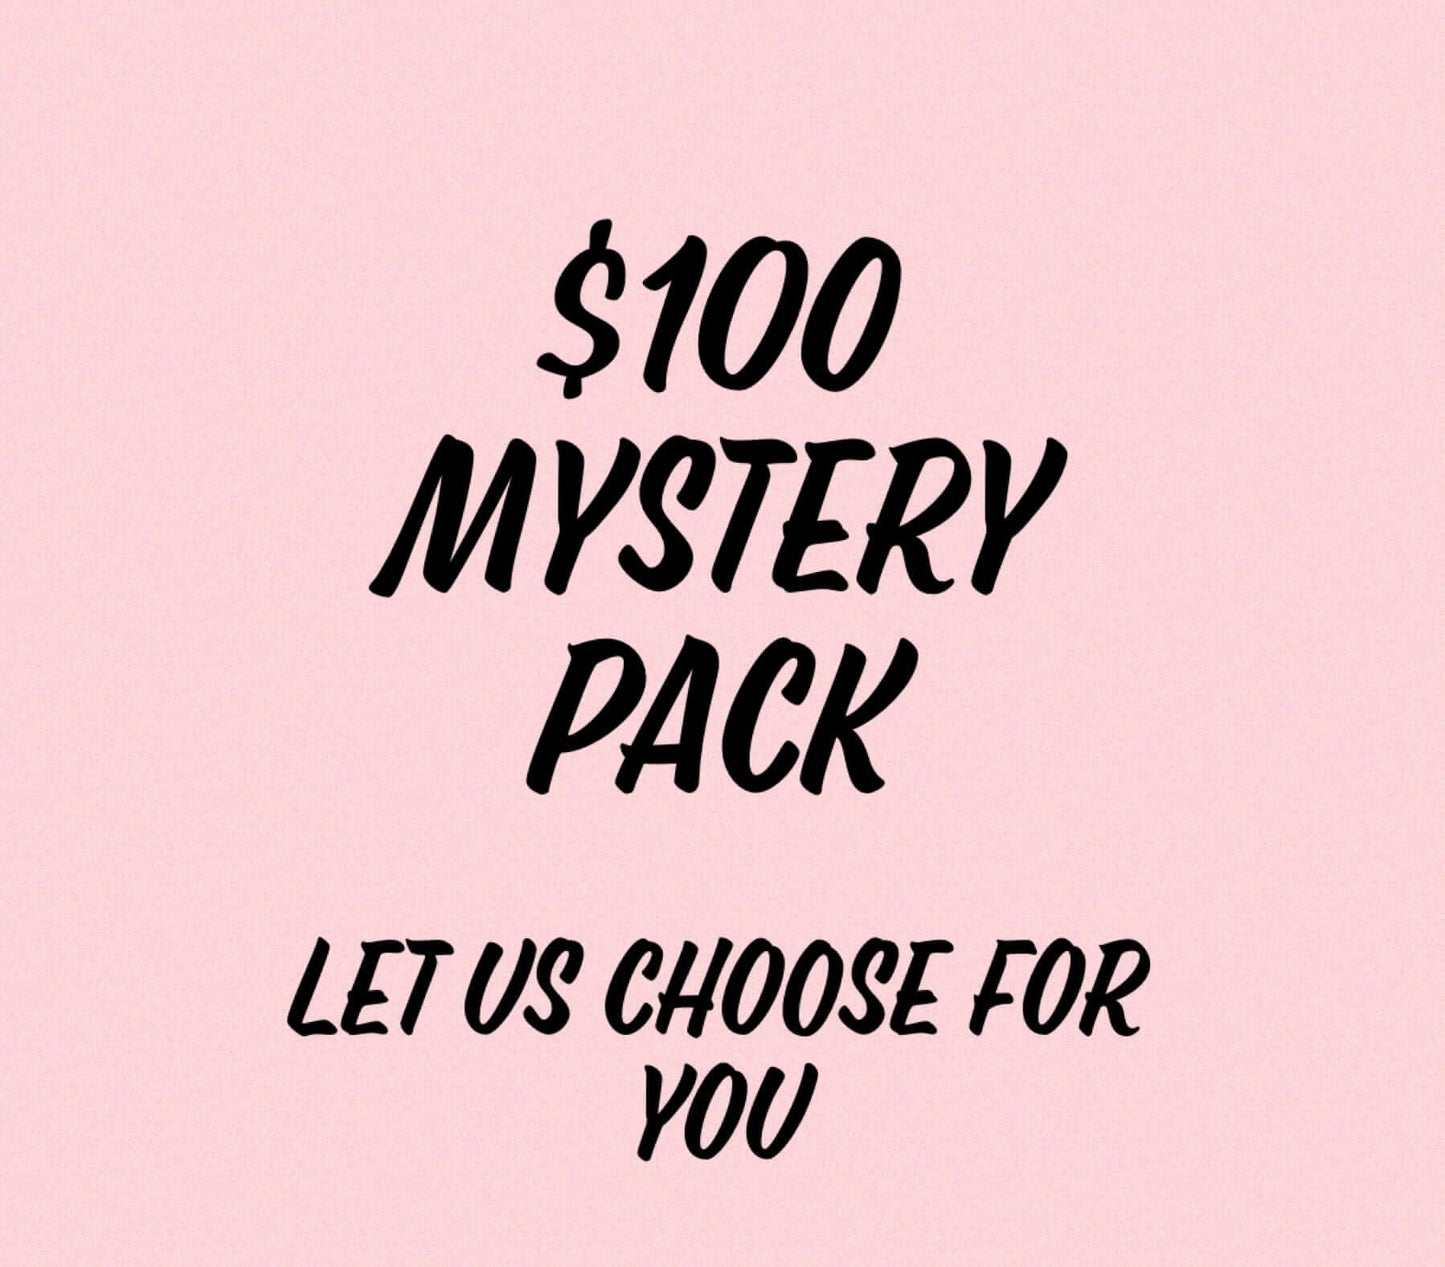 $100 Mystery Pack